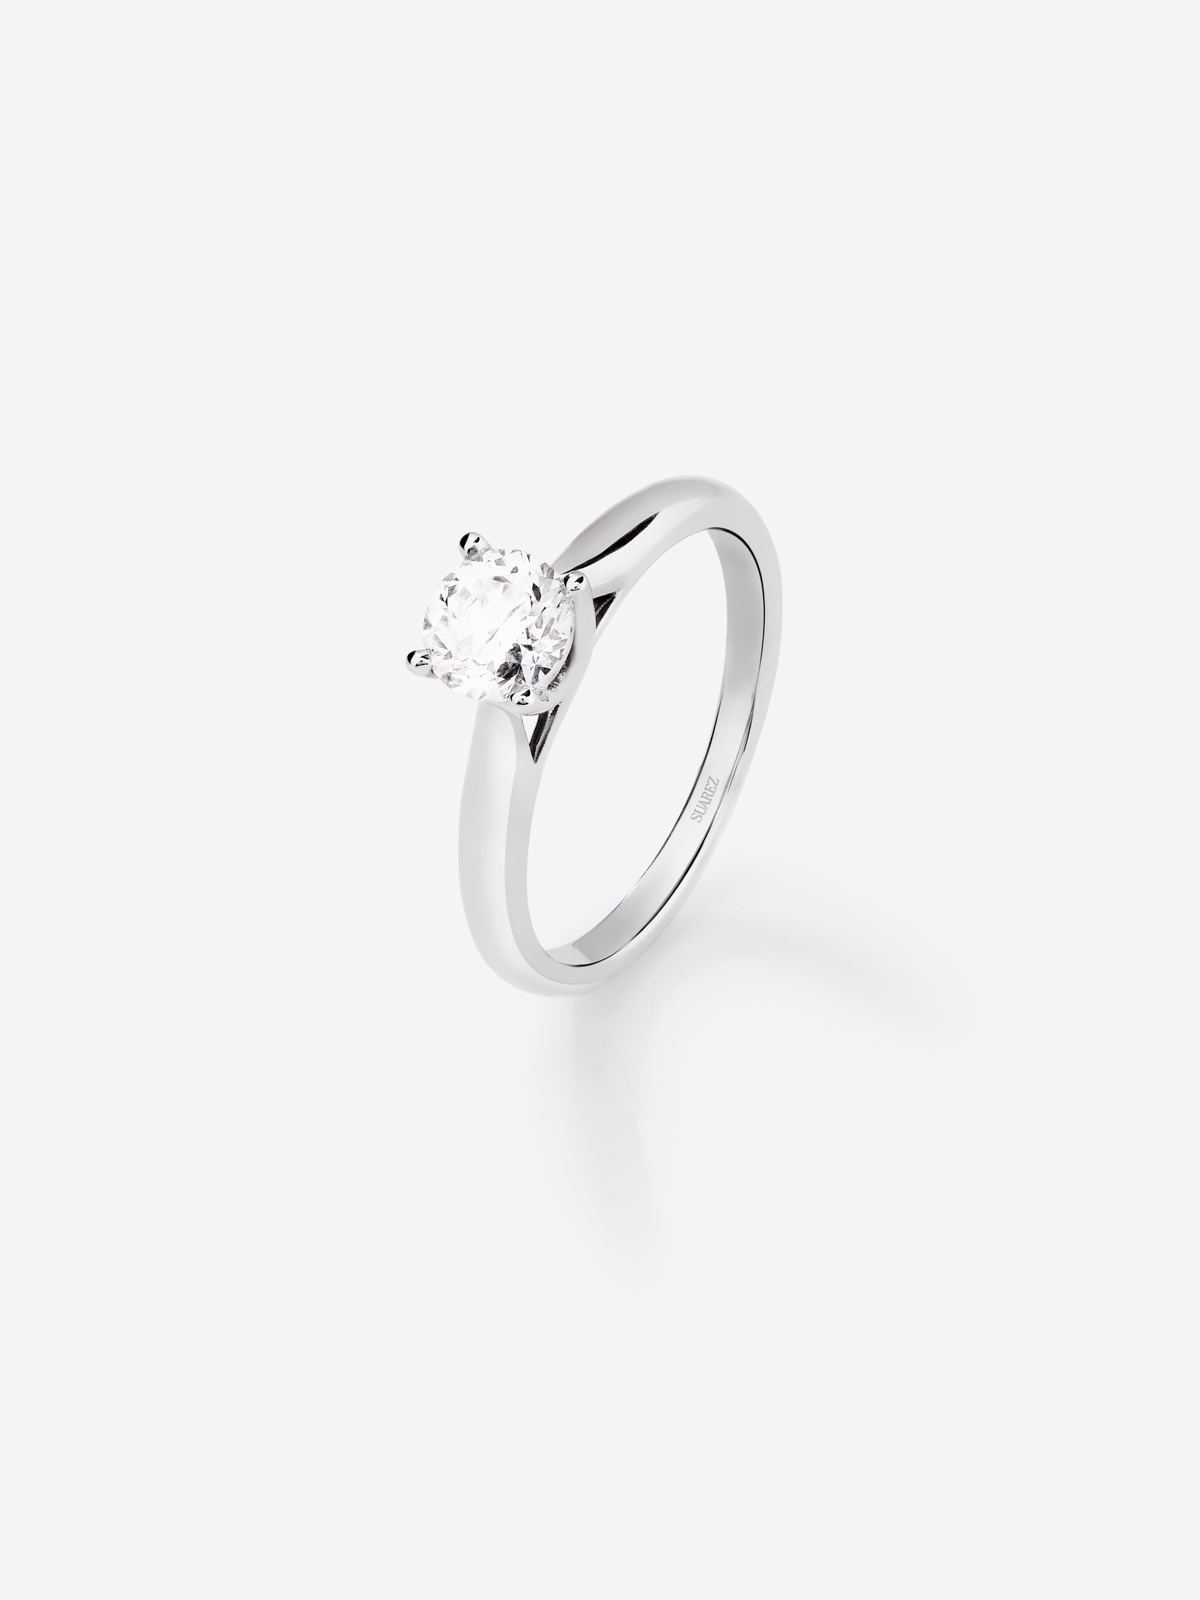 18K White Gold Engagement Solitaire with 0.70 Carat Center Diamond